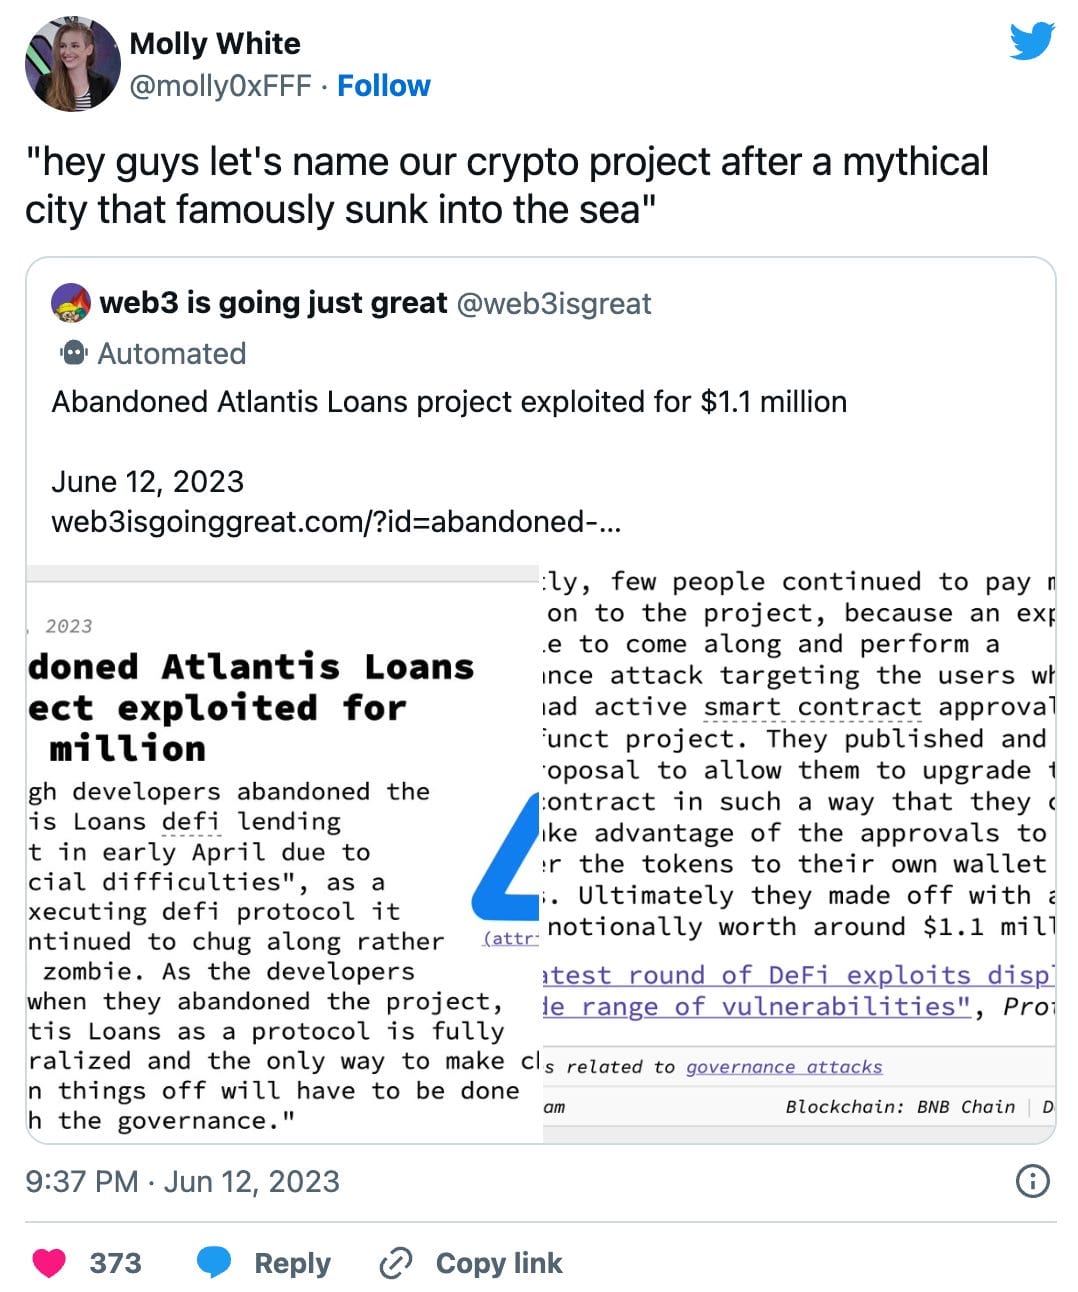 Tweet by Molly White (@molly0xfff) "hey guys let's name our crypto project after a mythical city that famously sunk into the sea"  Quoted tweet by web3 is going great (@web3isgreat): "Abandoned Atlantis Loans project exploited for $1.1 million  June 12, 2023 https://web3isgoinggreat.com/?id=abandoned-atlantis-loans-project-exploited-for-1-1-million"